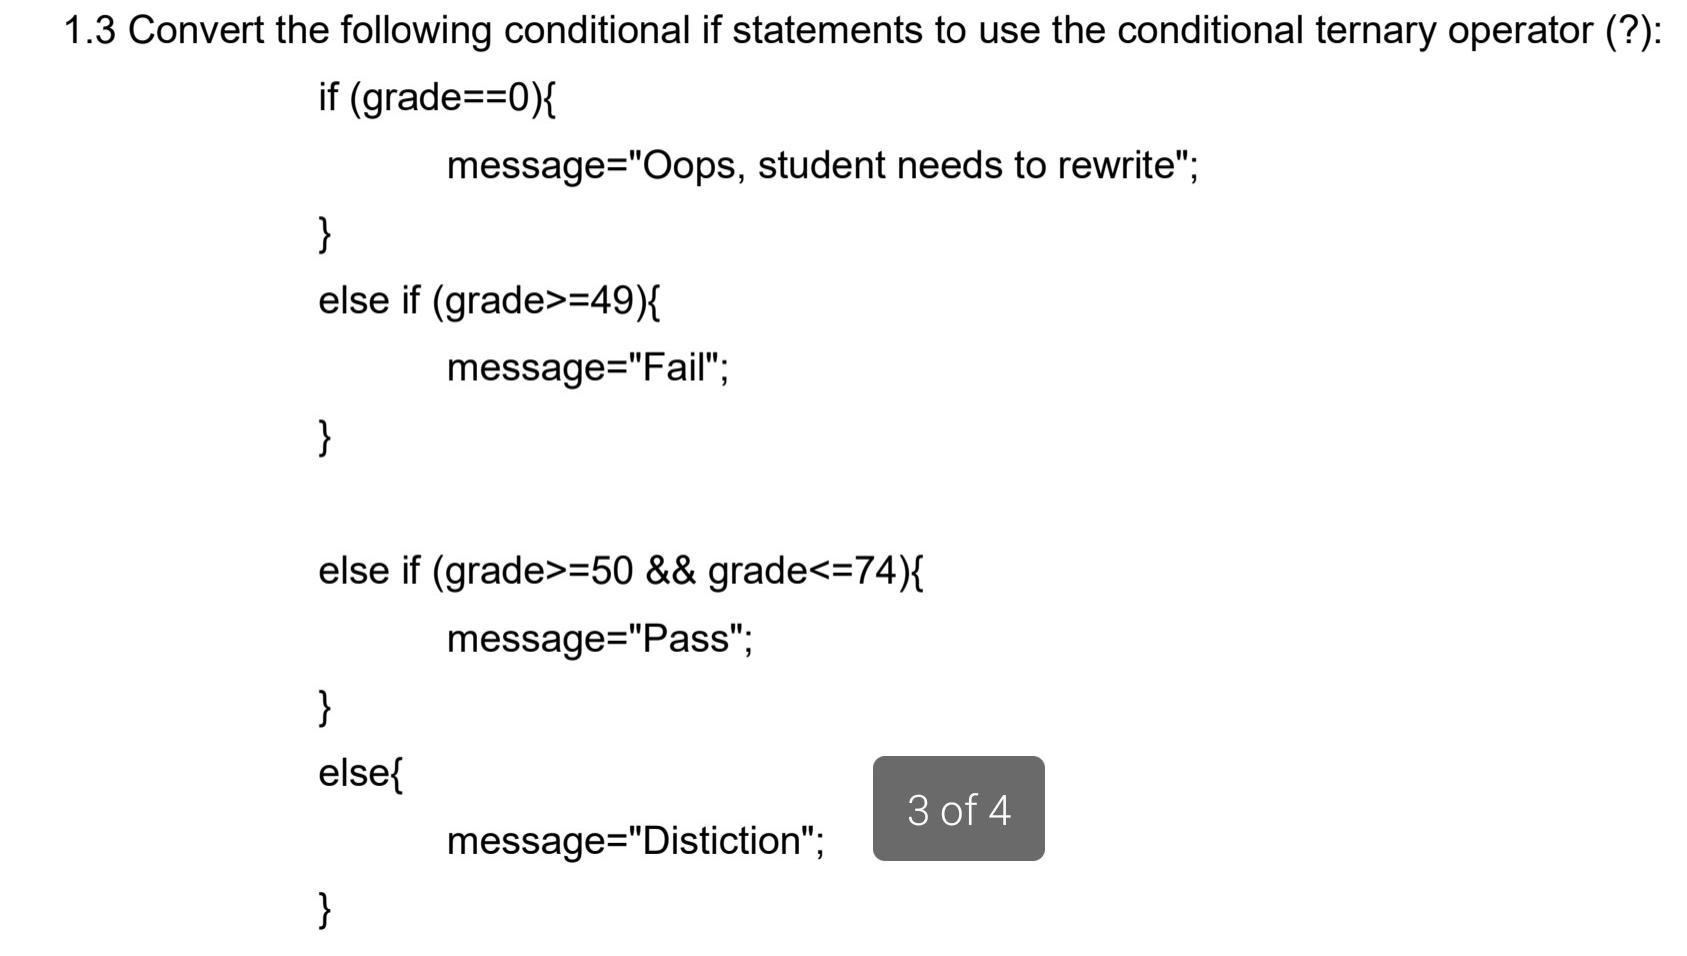 1.3 Convert the following conditional if statements to use the conditional ternary operator (?): if